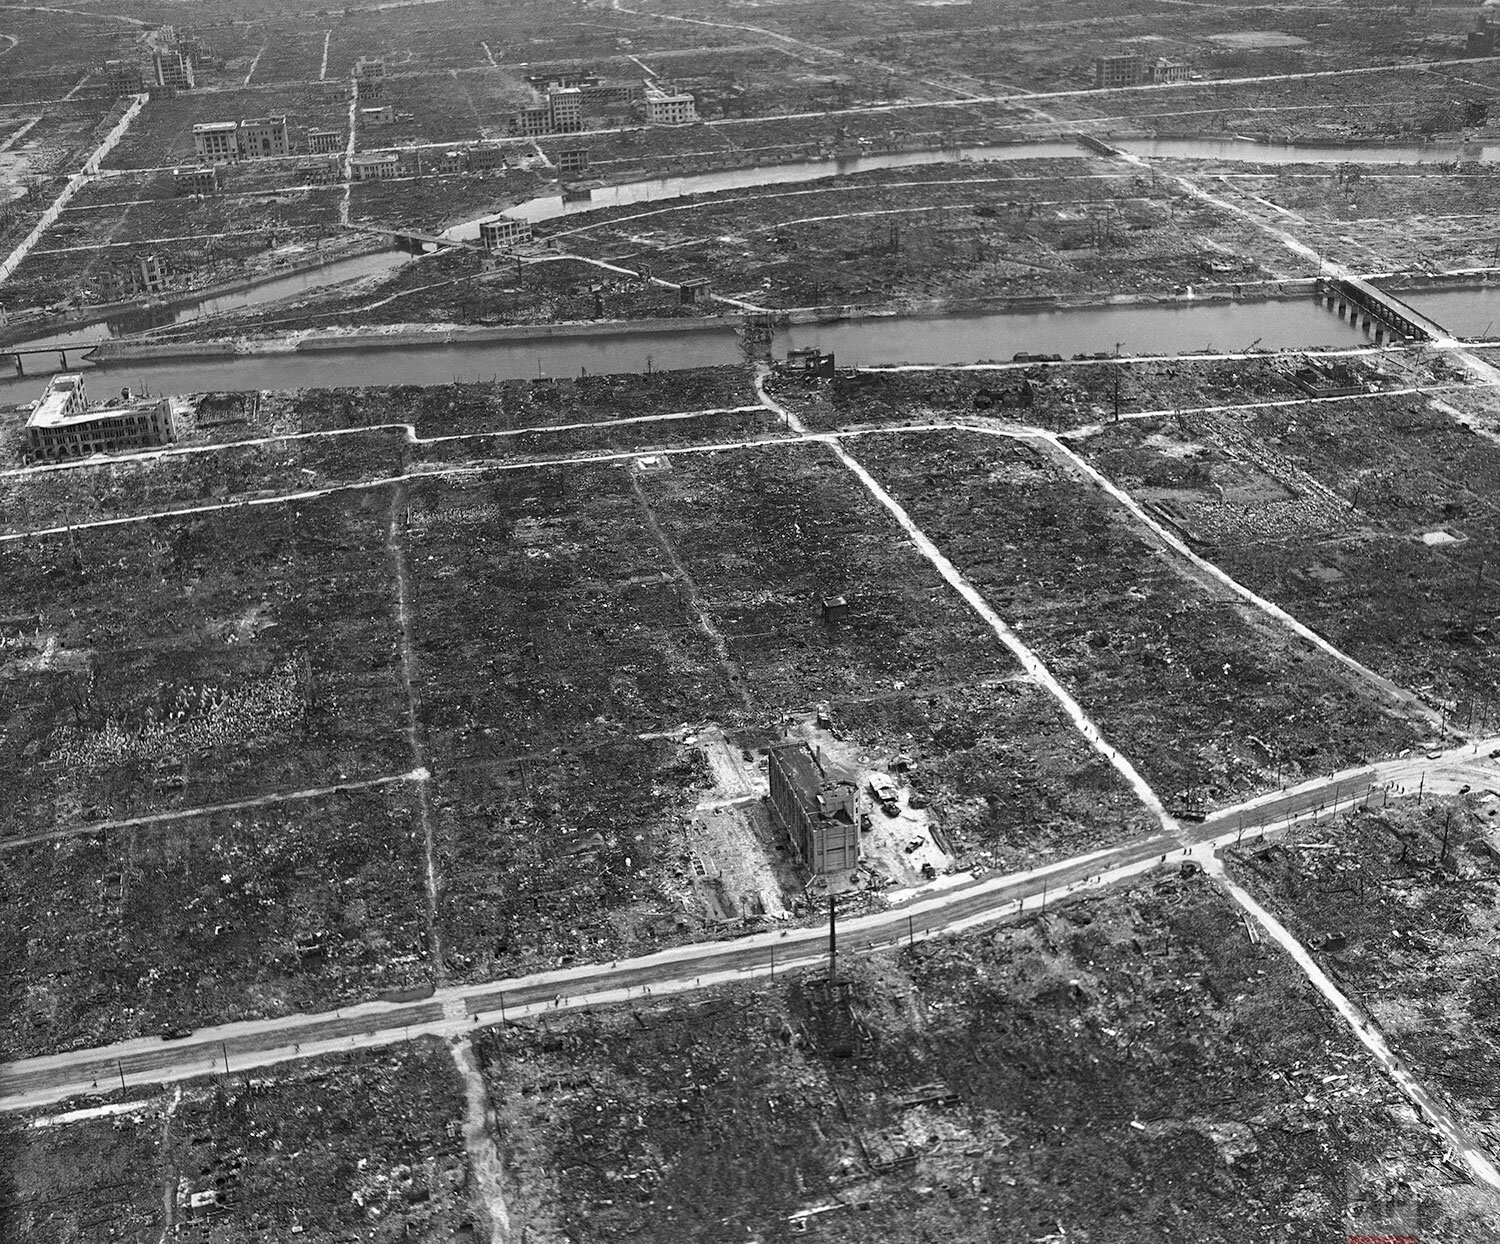  This is an aerial view of the remains of the city of Hiroshima, Japan, Sept. 5, 1945, one month after the atomic bomb was dropped on it. (AP Photo/Max Desfor) 